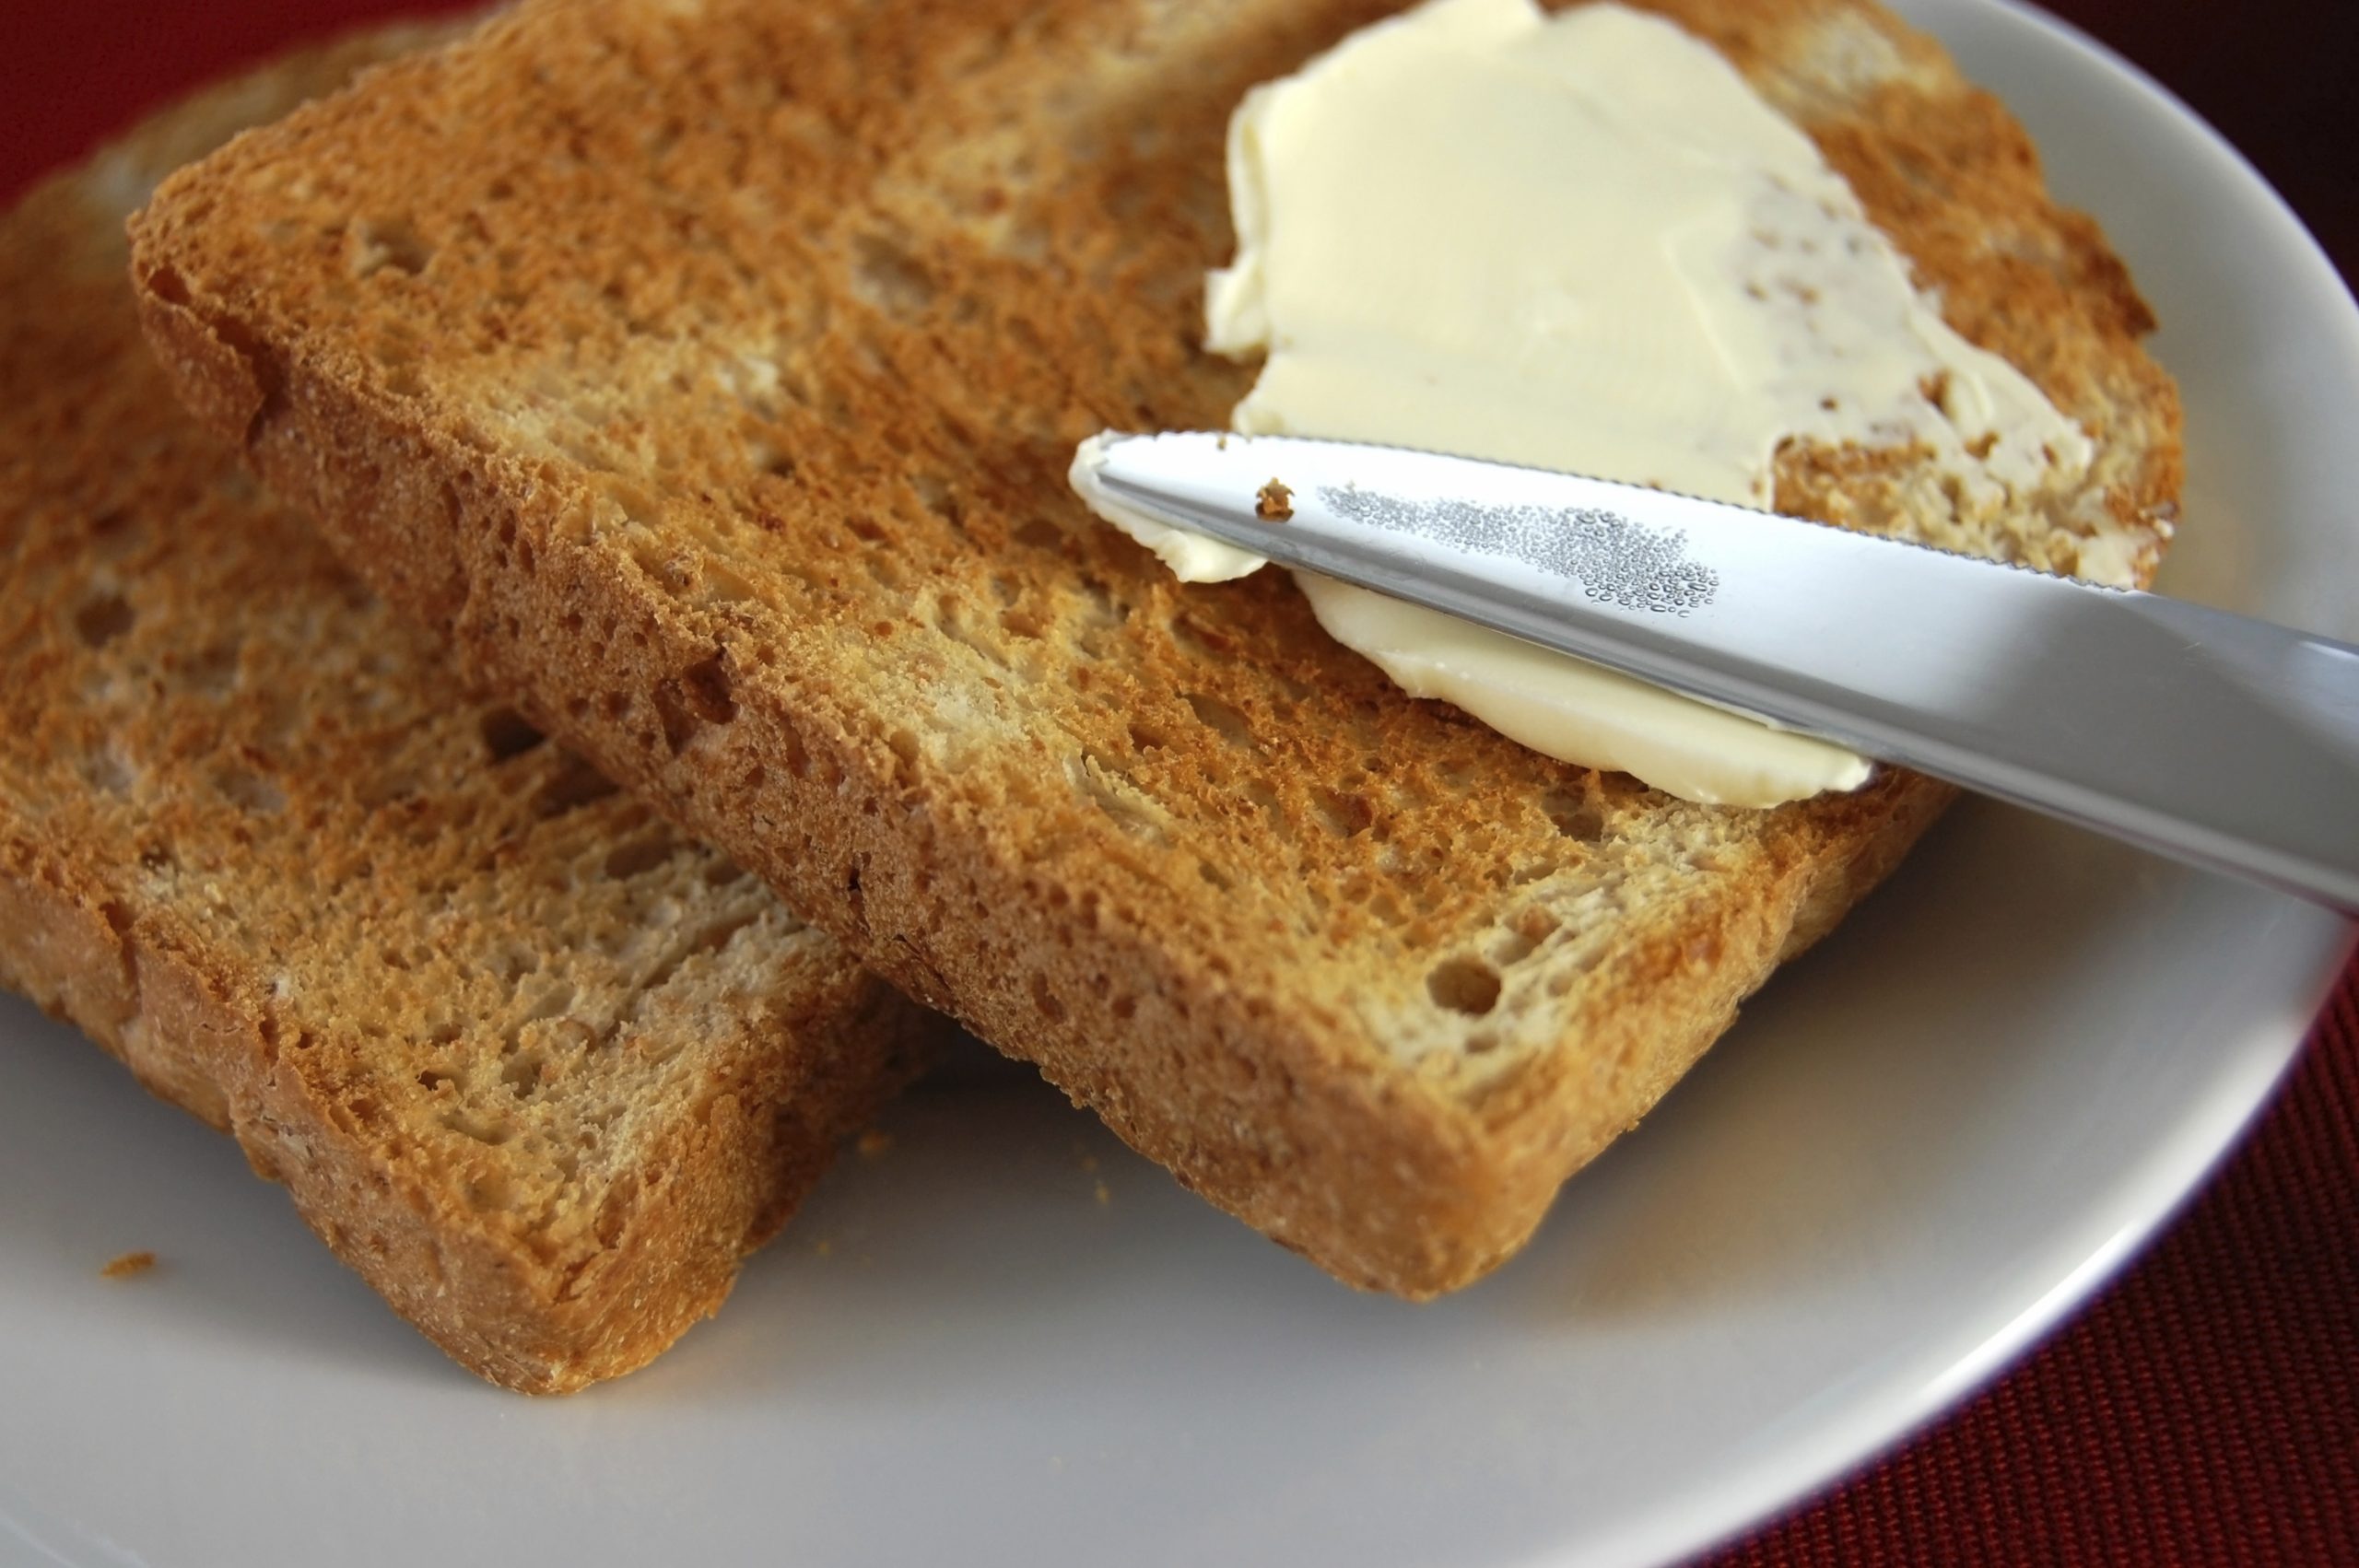 Calories in a Slice of Bread and Butter